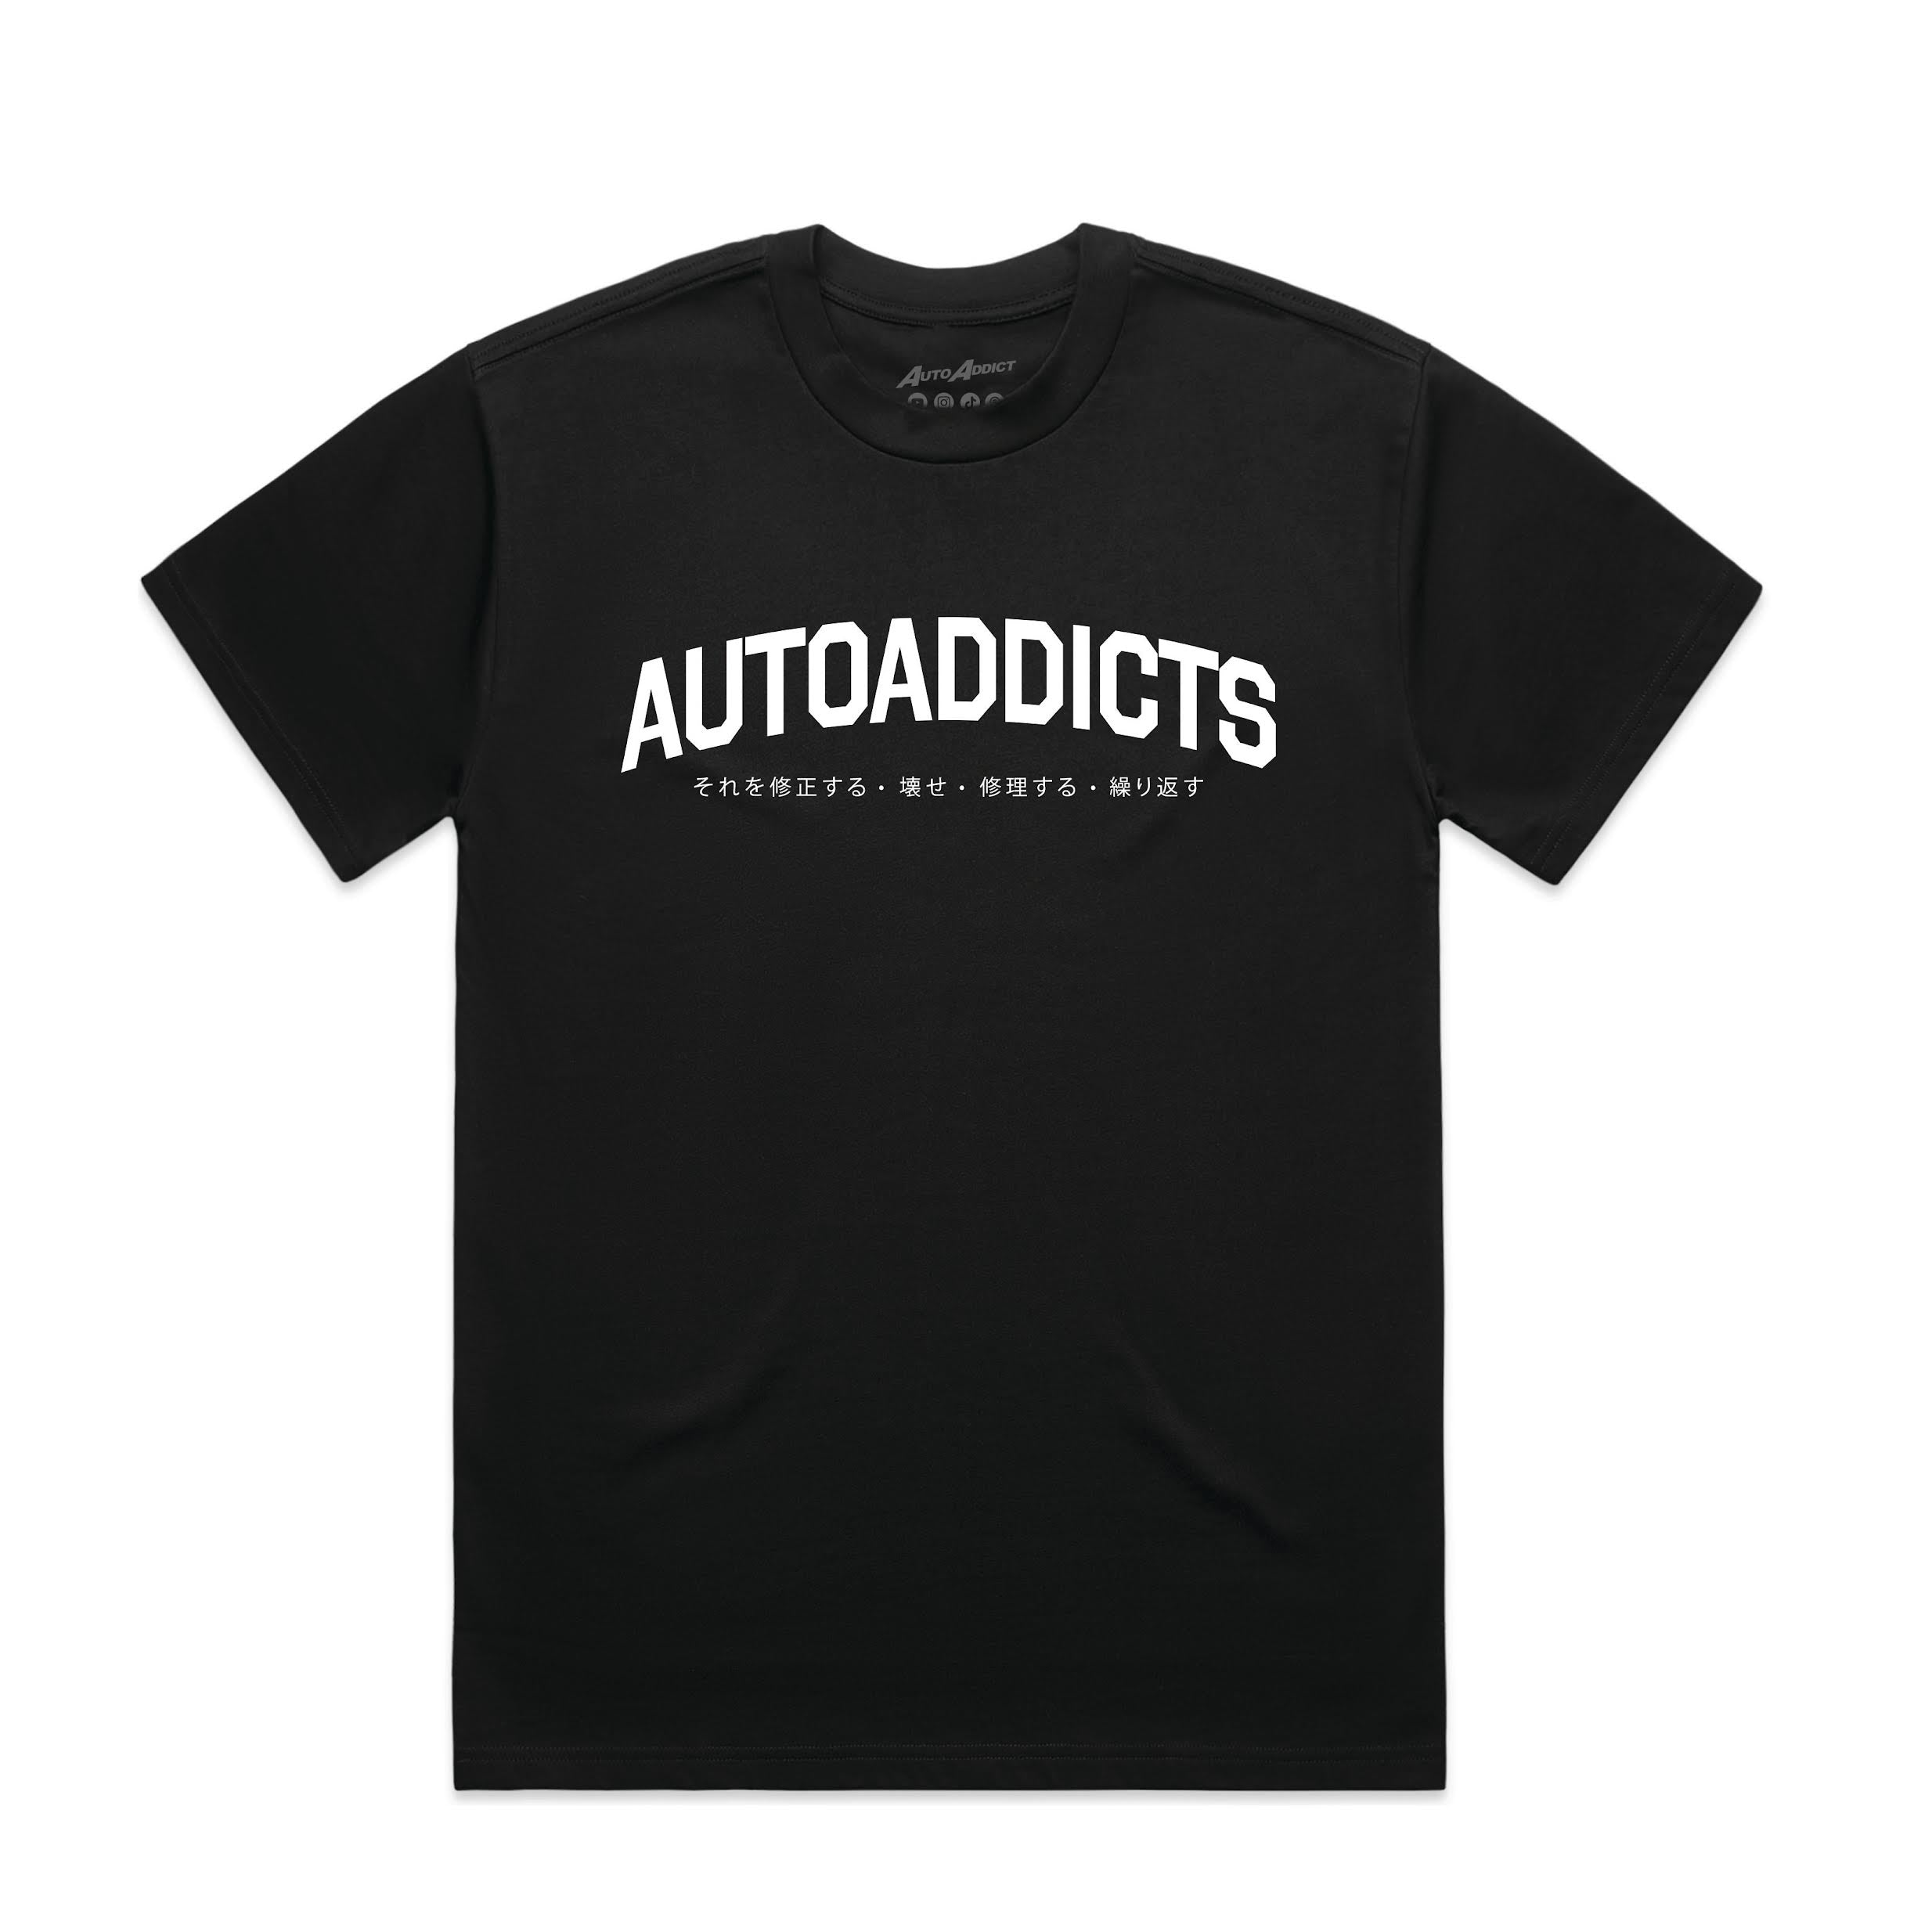 Autoaddicts in Chinese letters life style T-Shirt